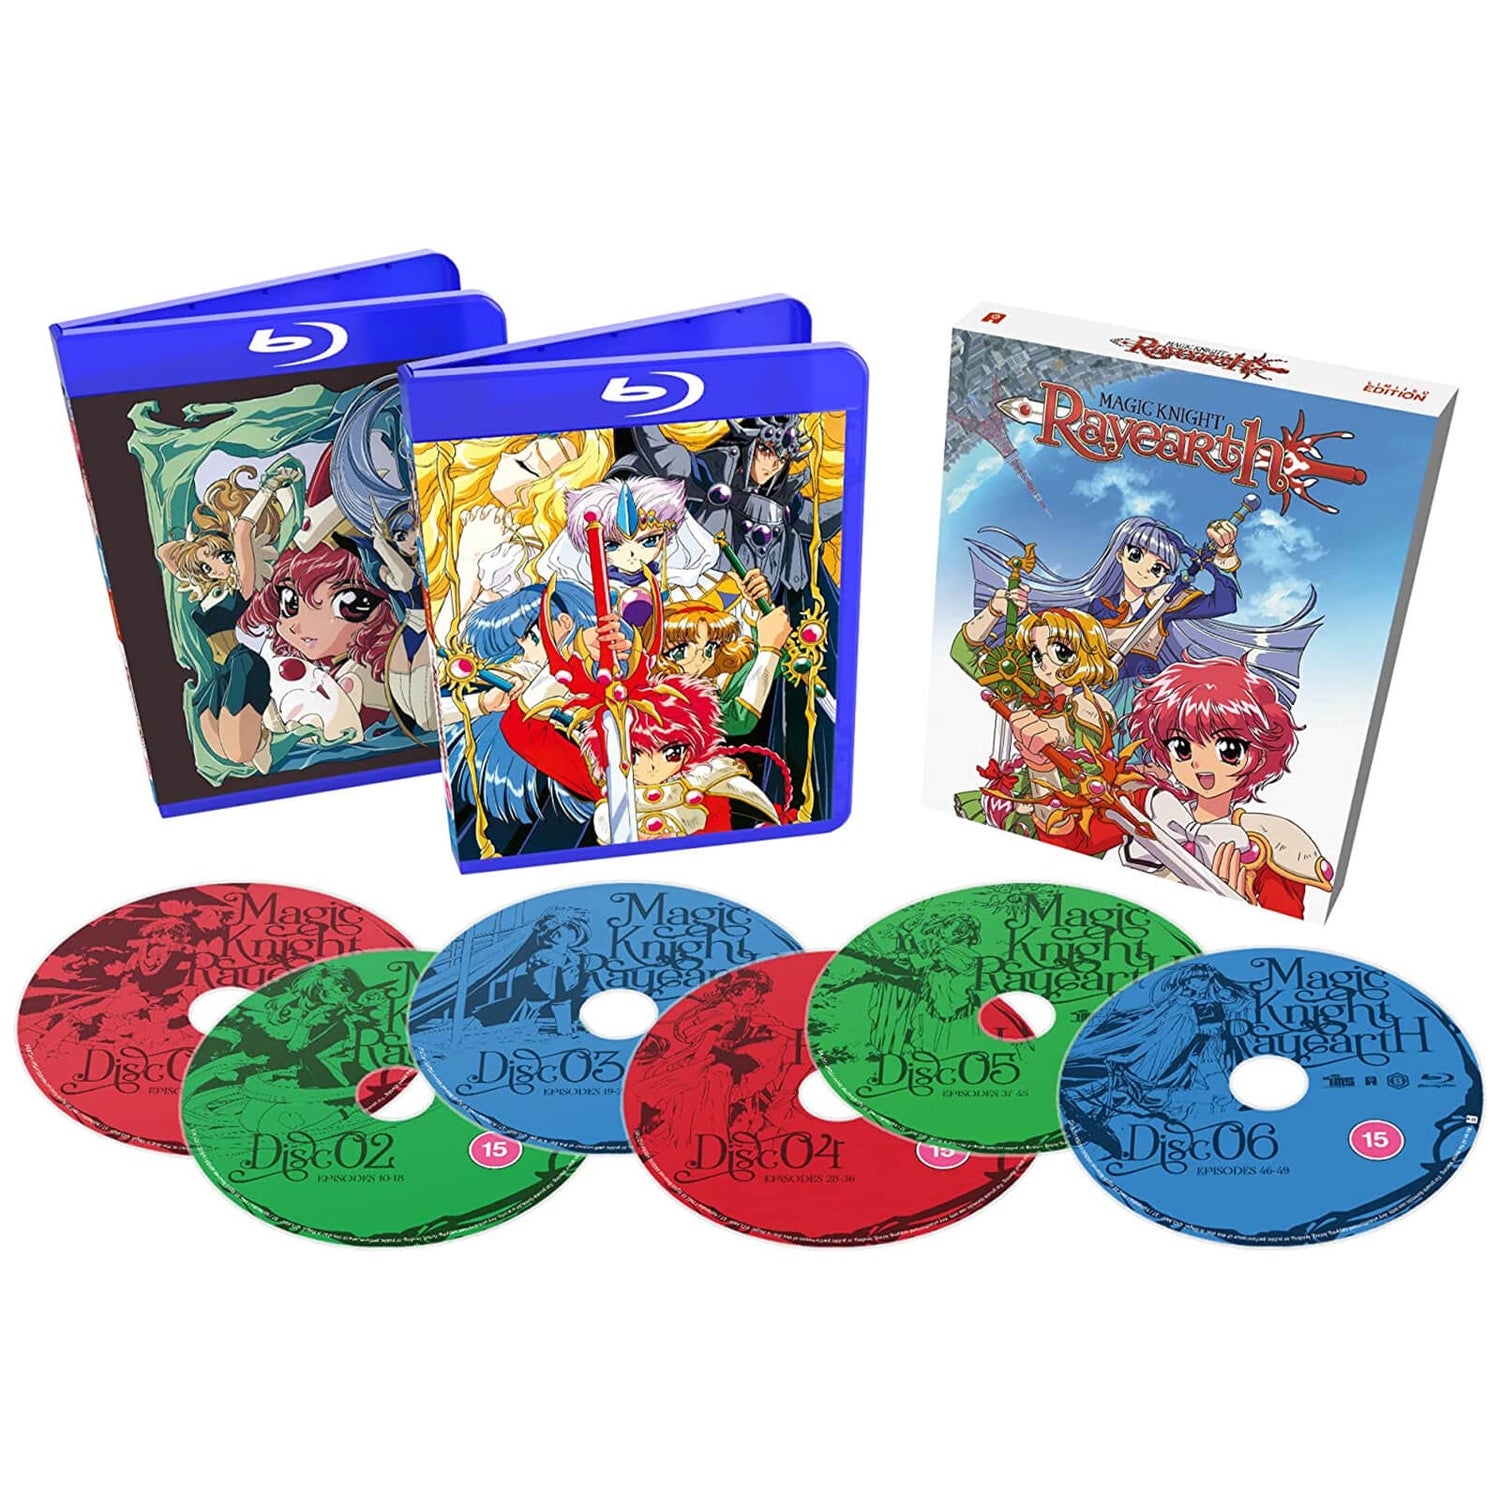 Magic Knight Rayearth: Complete Series (Collector's Limited Edition)